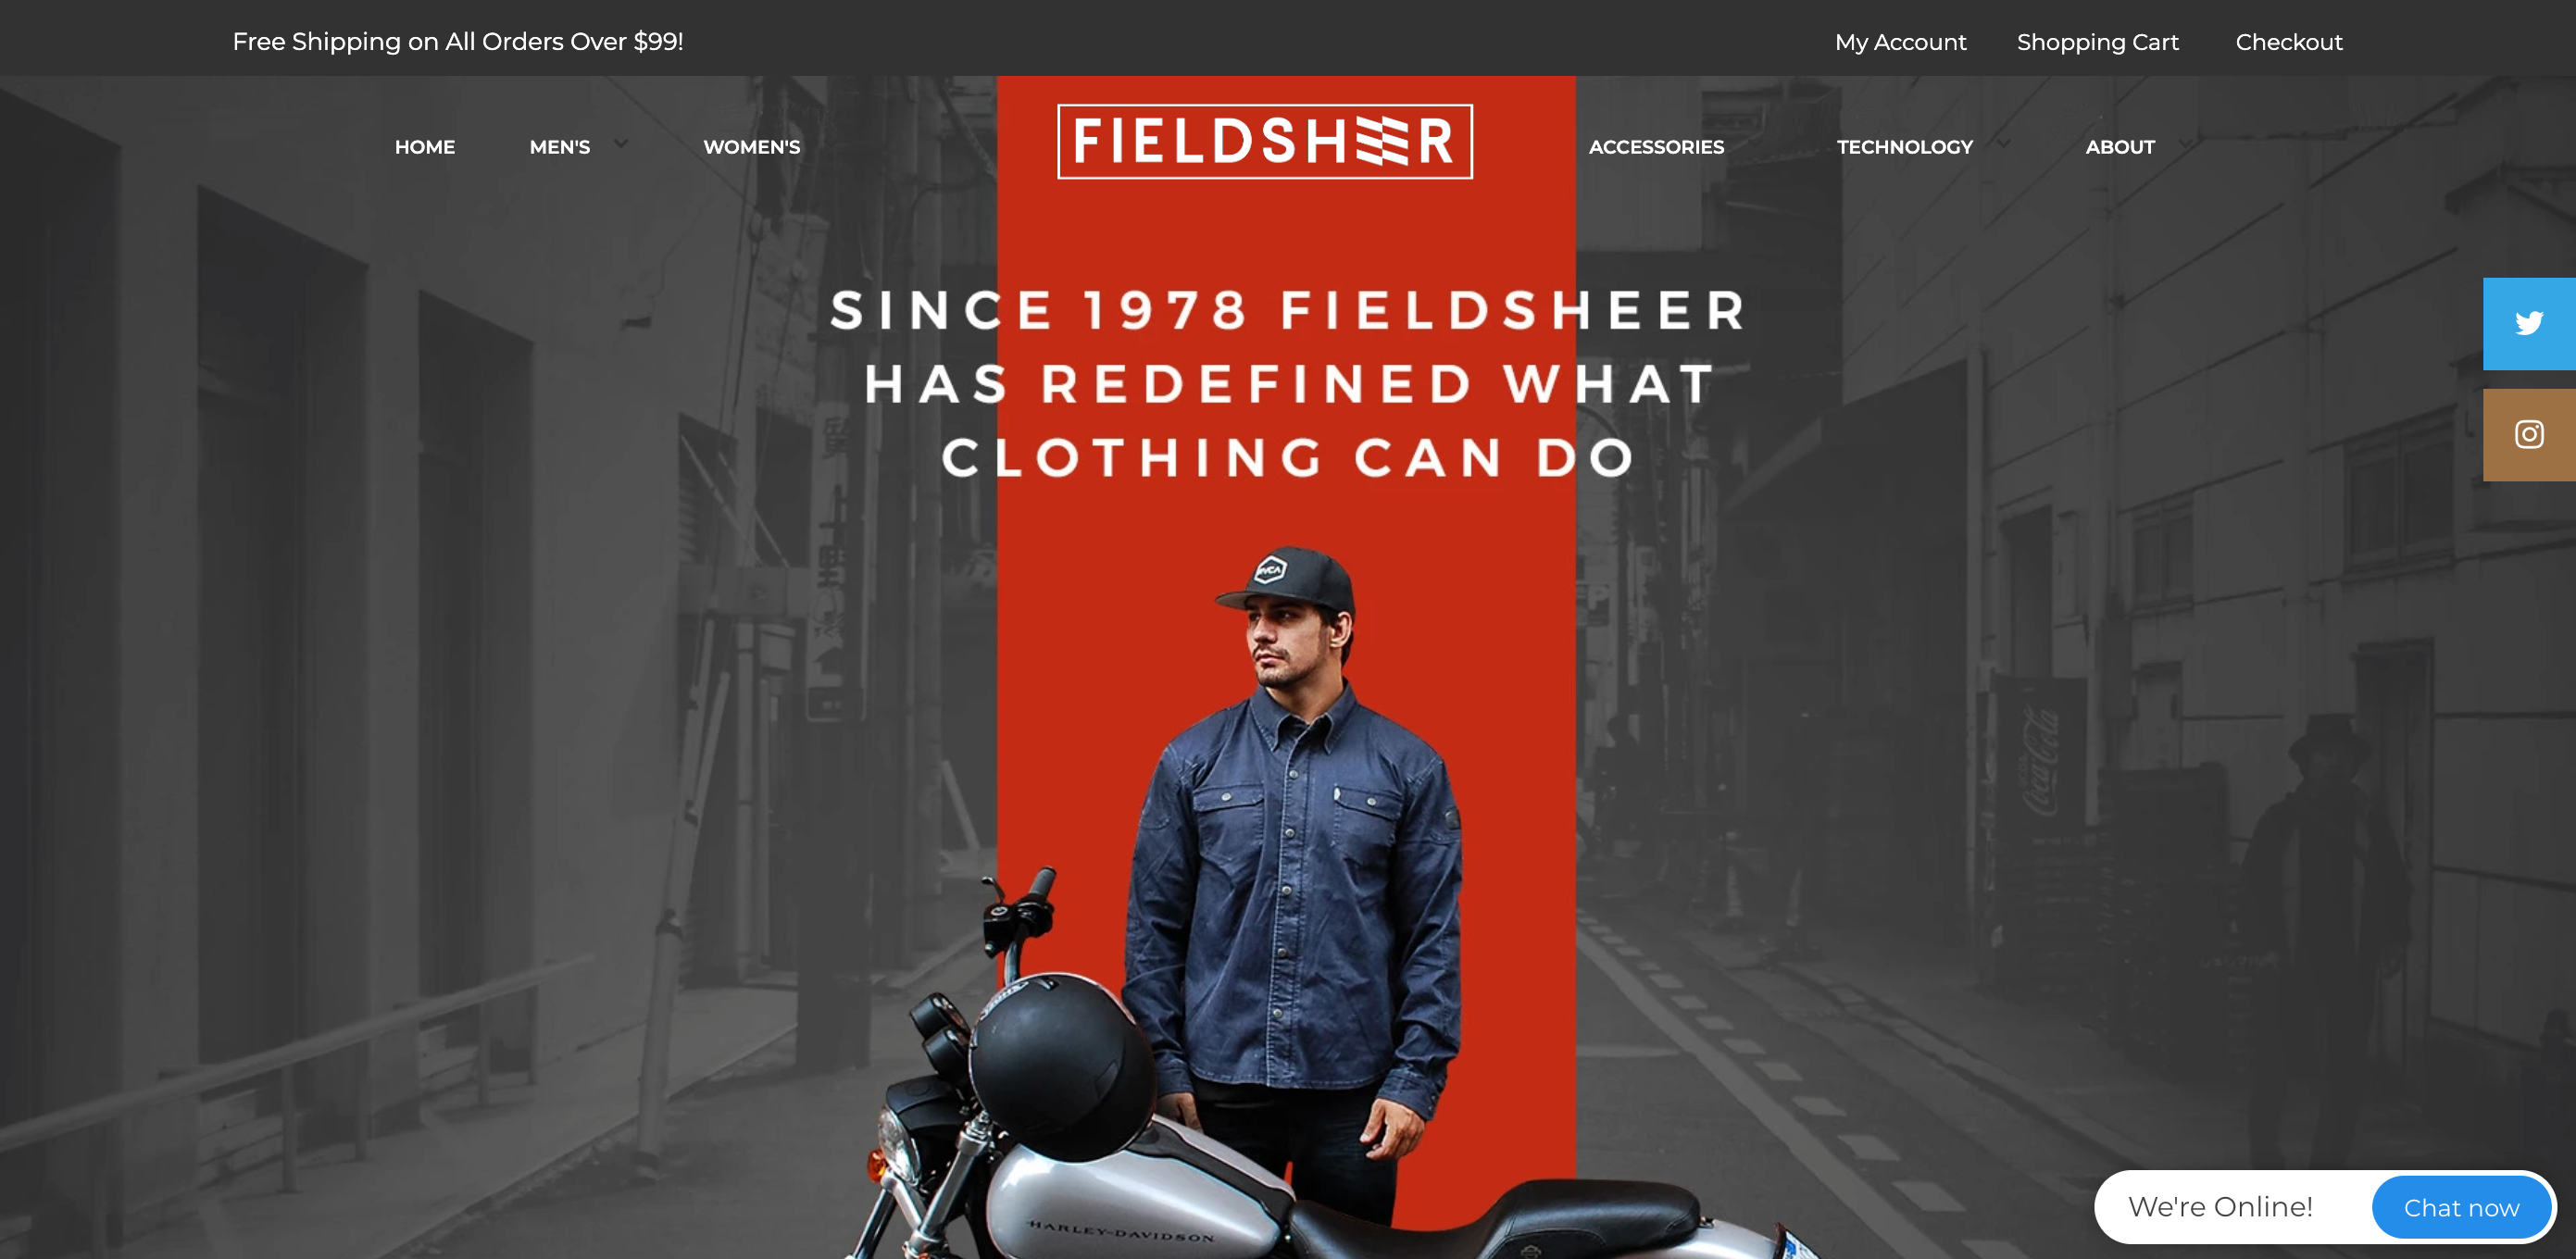 Fieldsheer Selected As Official Heated Apparel Partner Of NFL